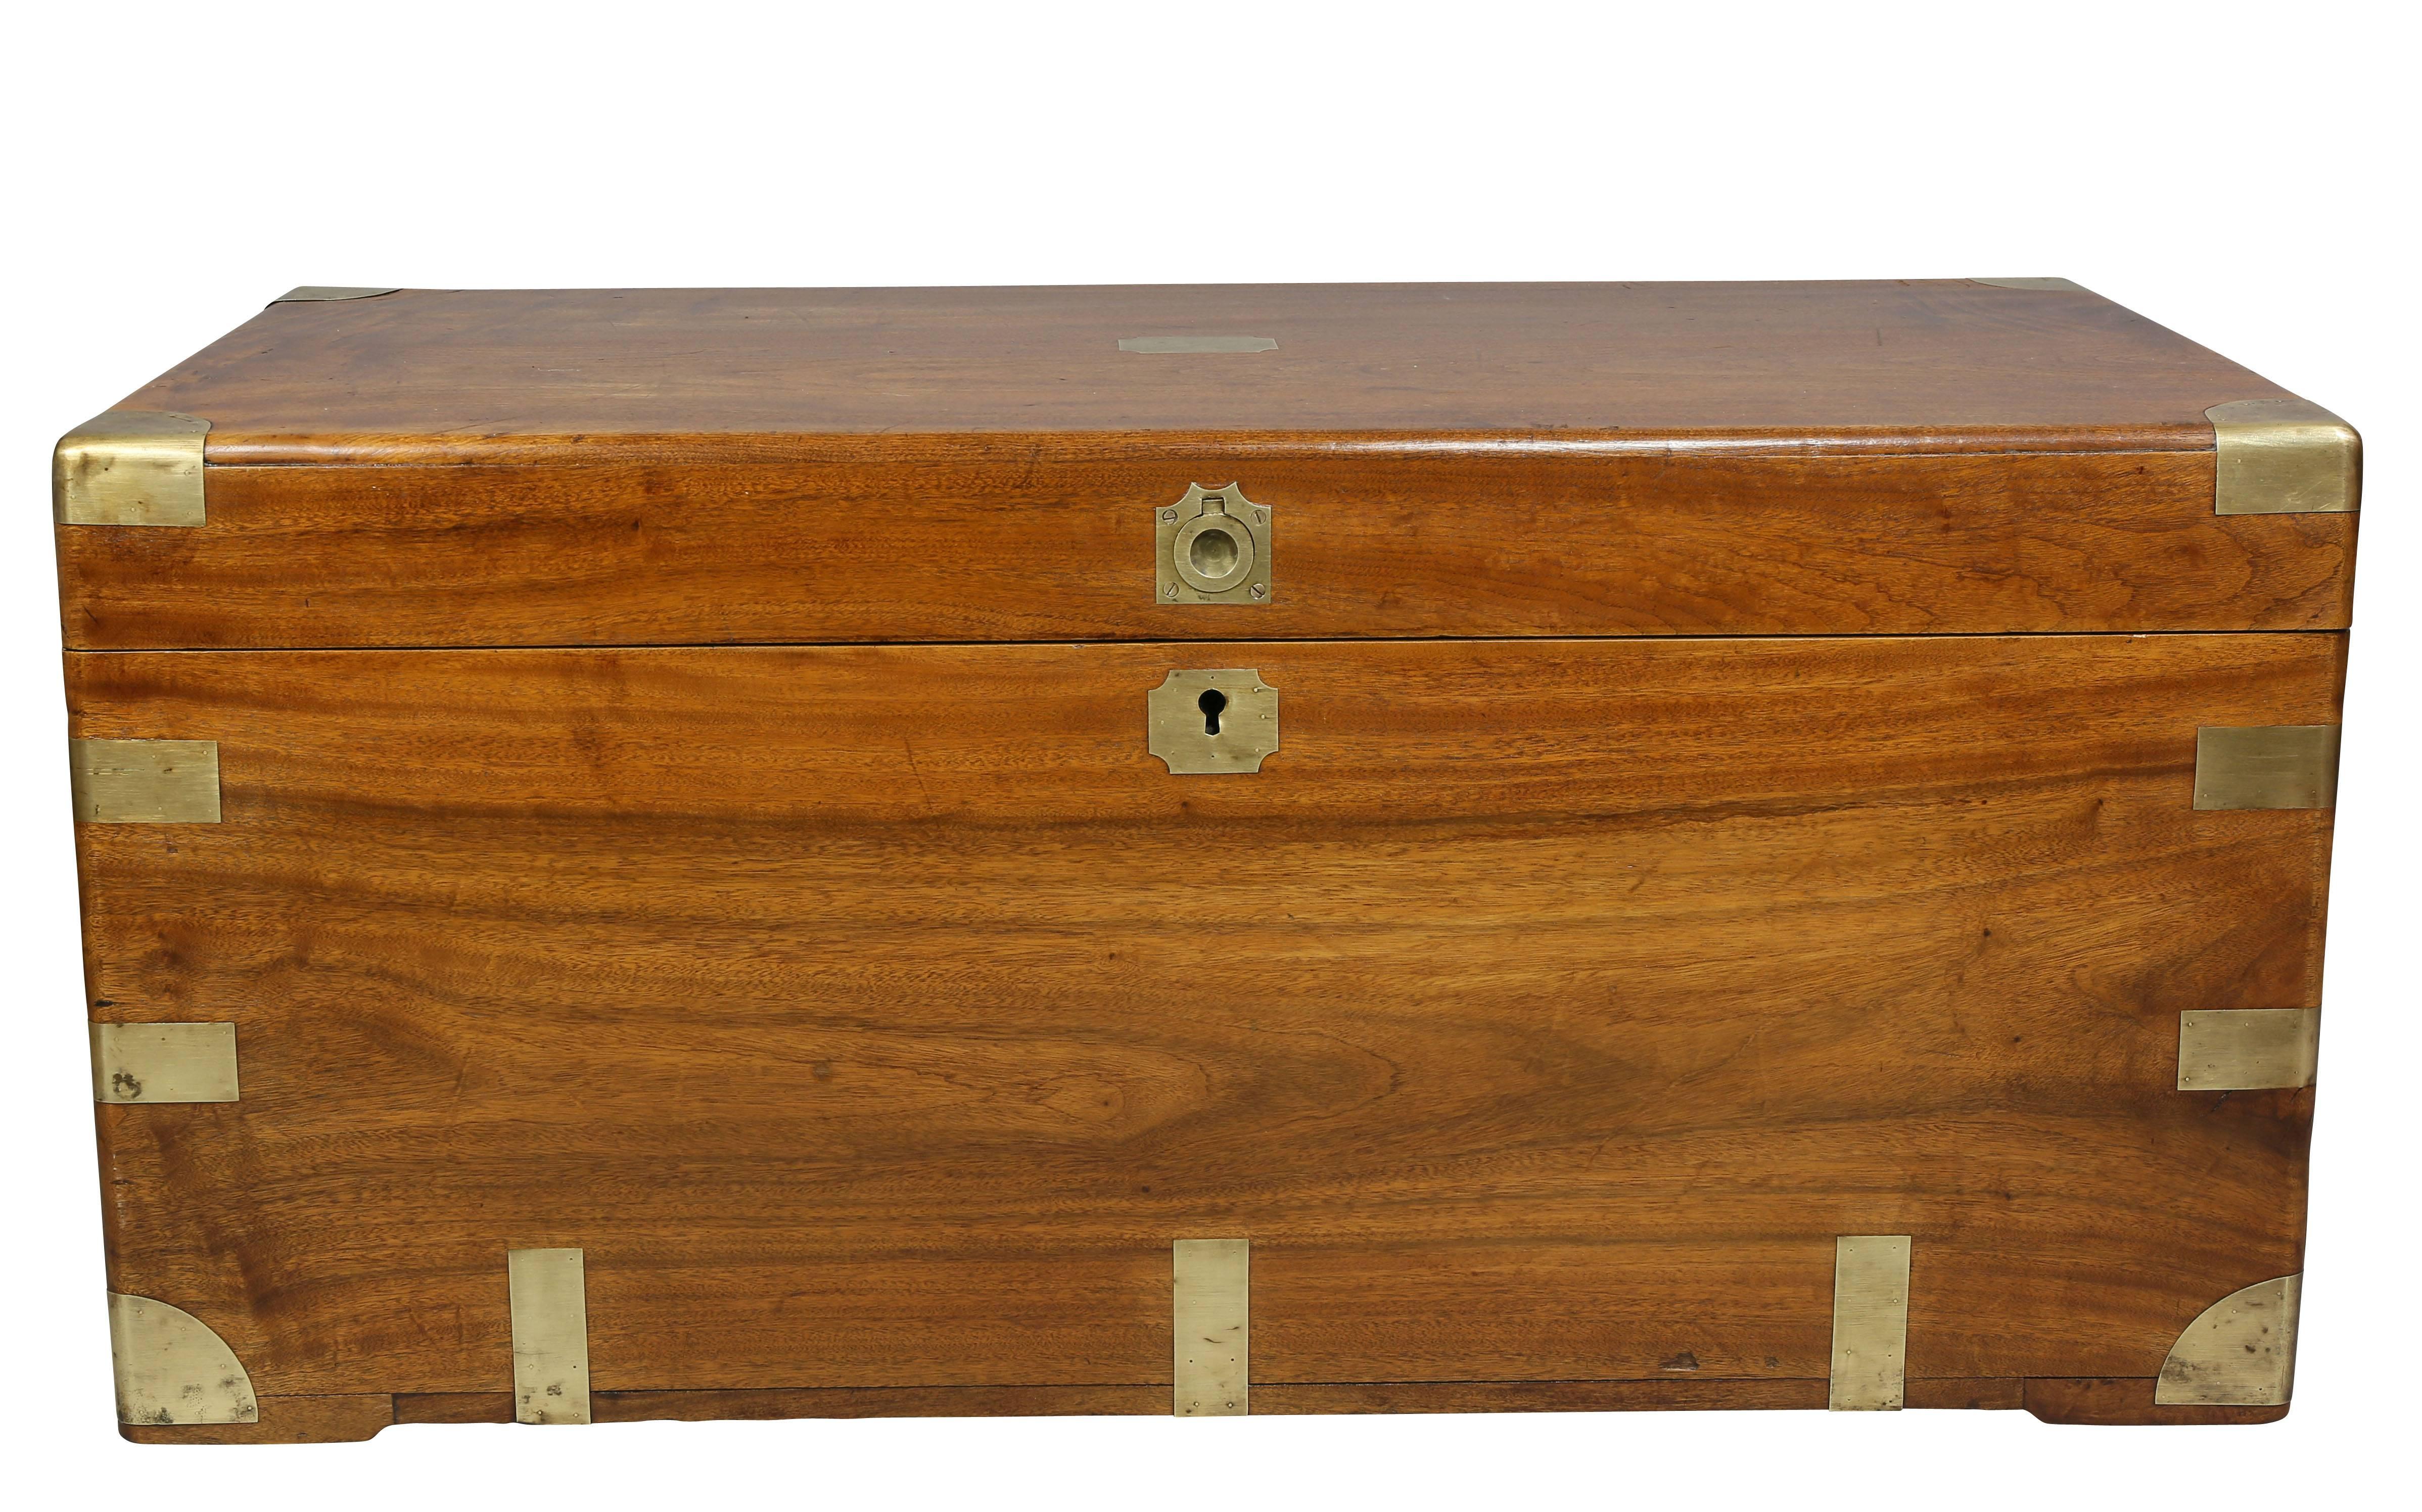 Chinese export brass bound camphor wood trunk. Typical form.